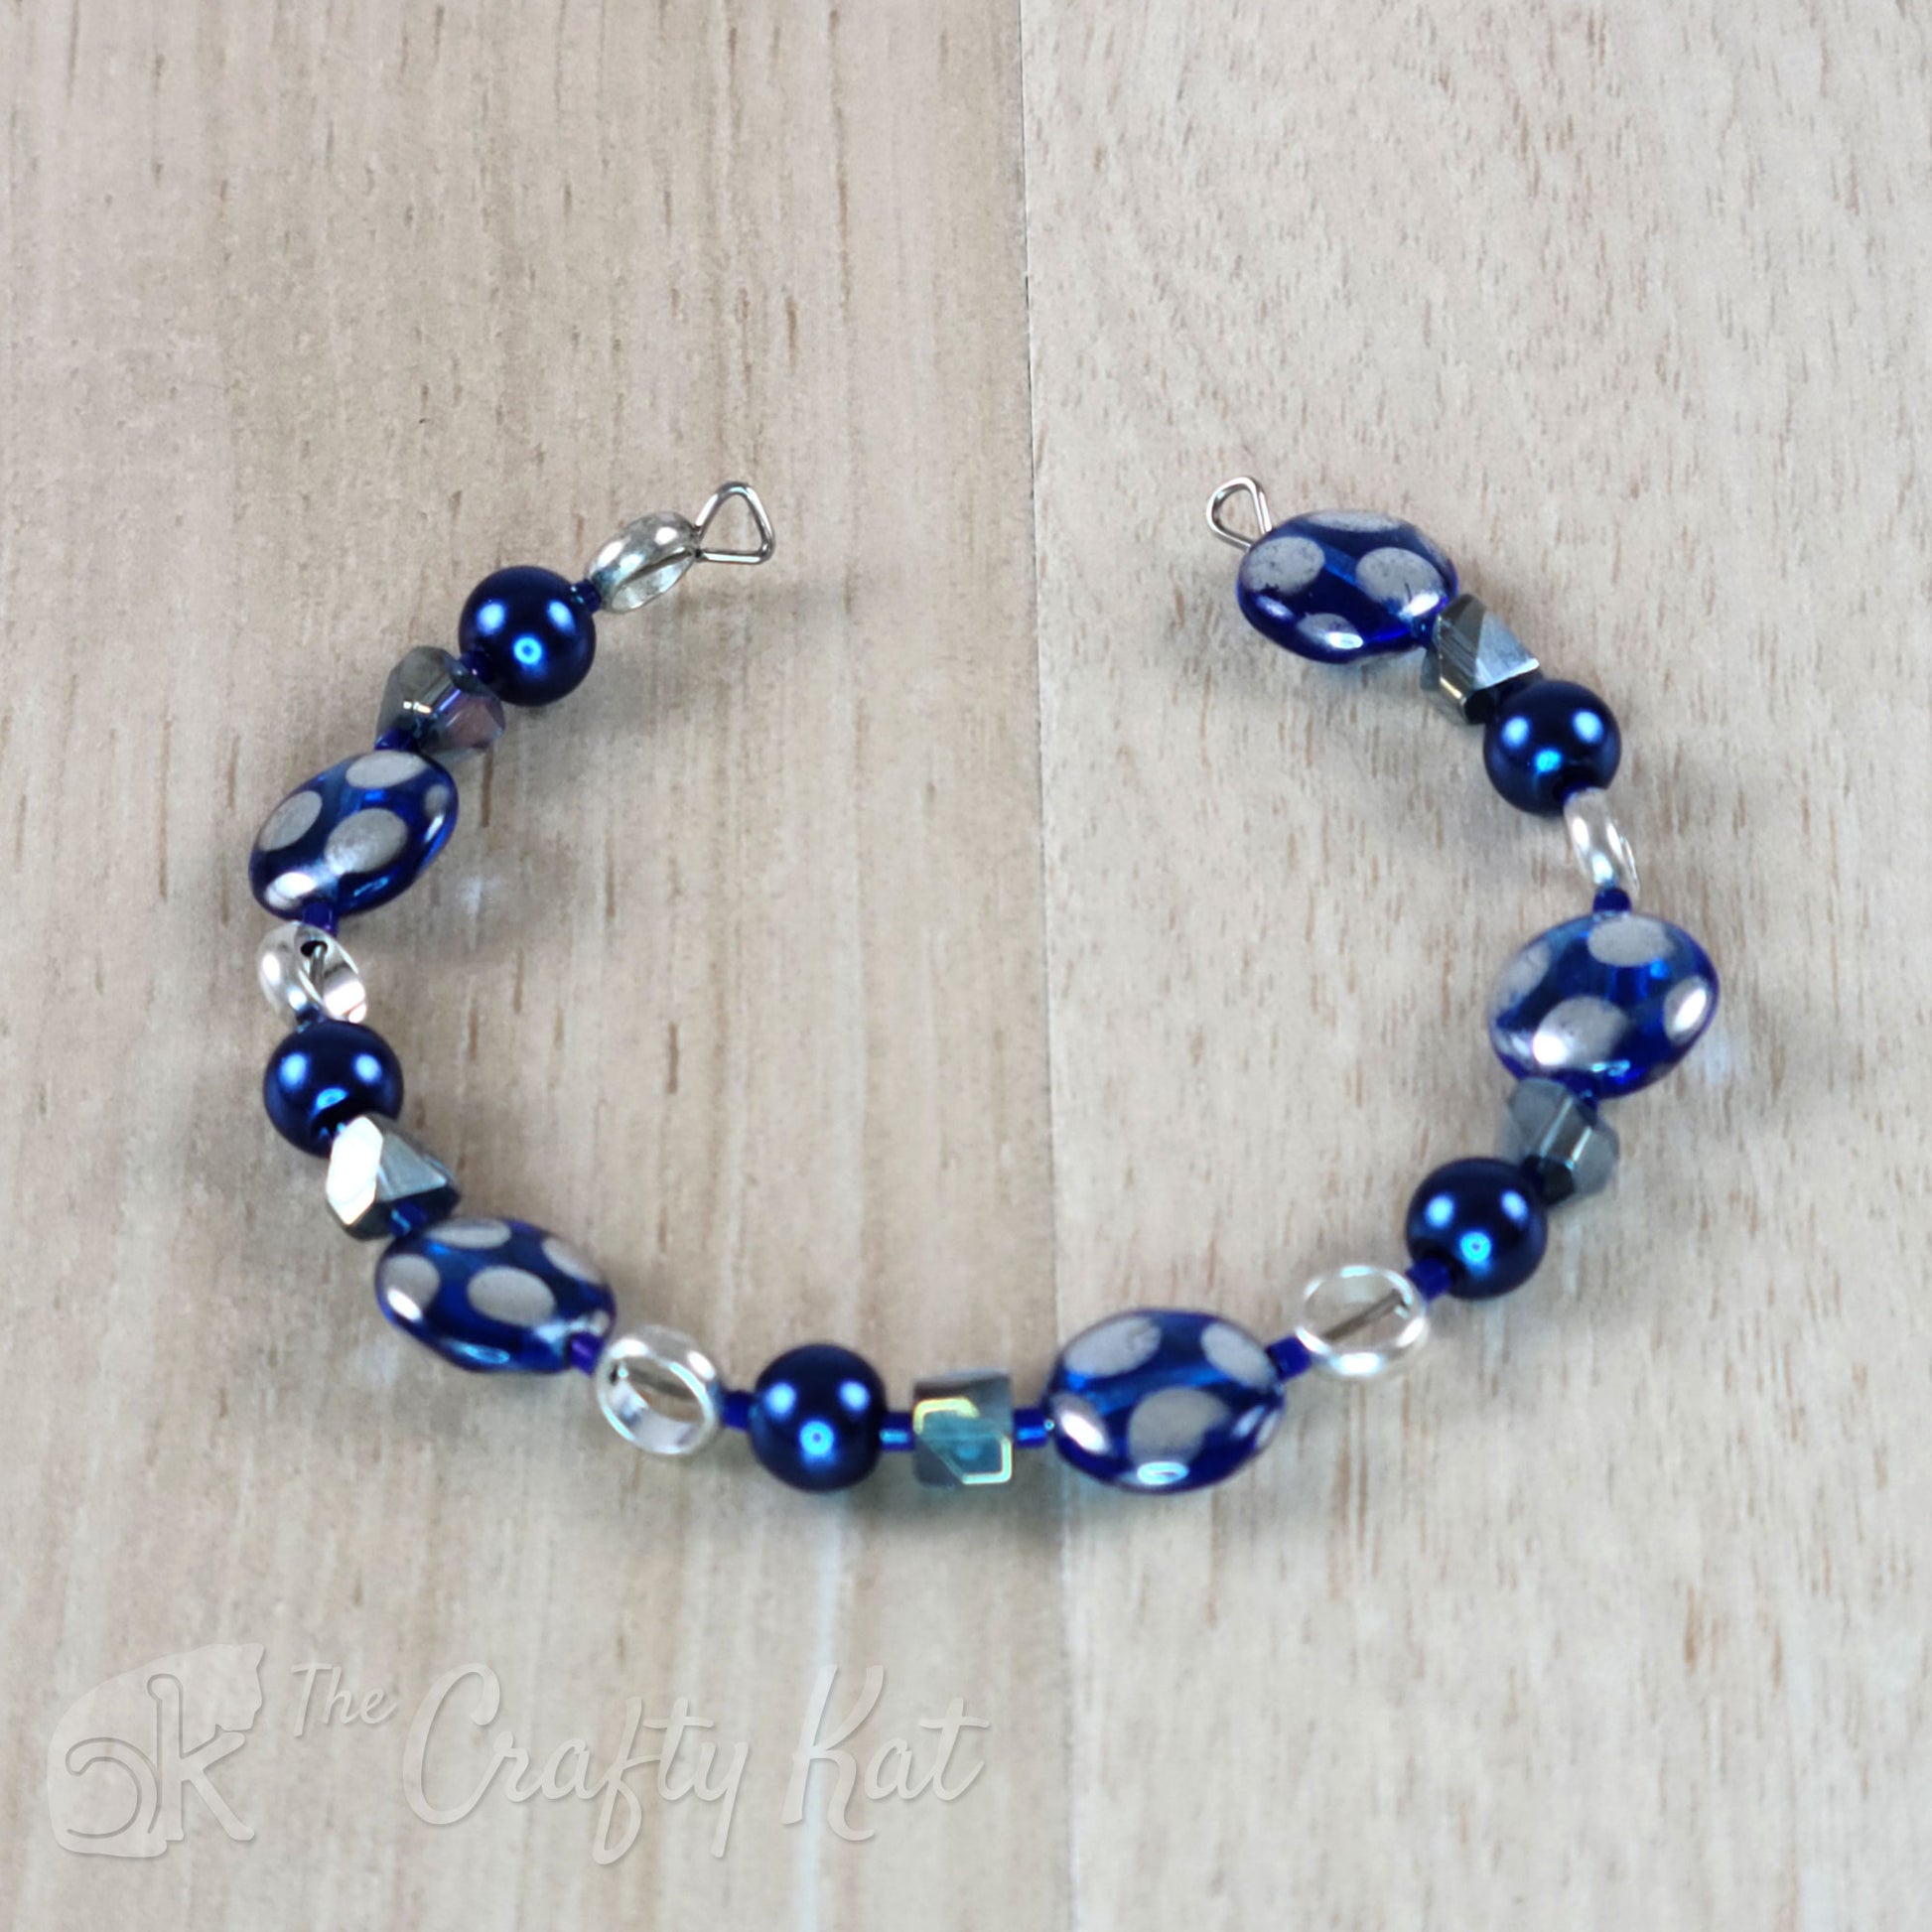 Steel memory wire cuff-style bracelet with blue glass pearls, blue angle-cut cubes, open silver-plated circles, and silver-dotted blue glass coin beads